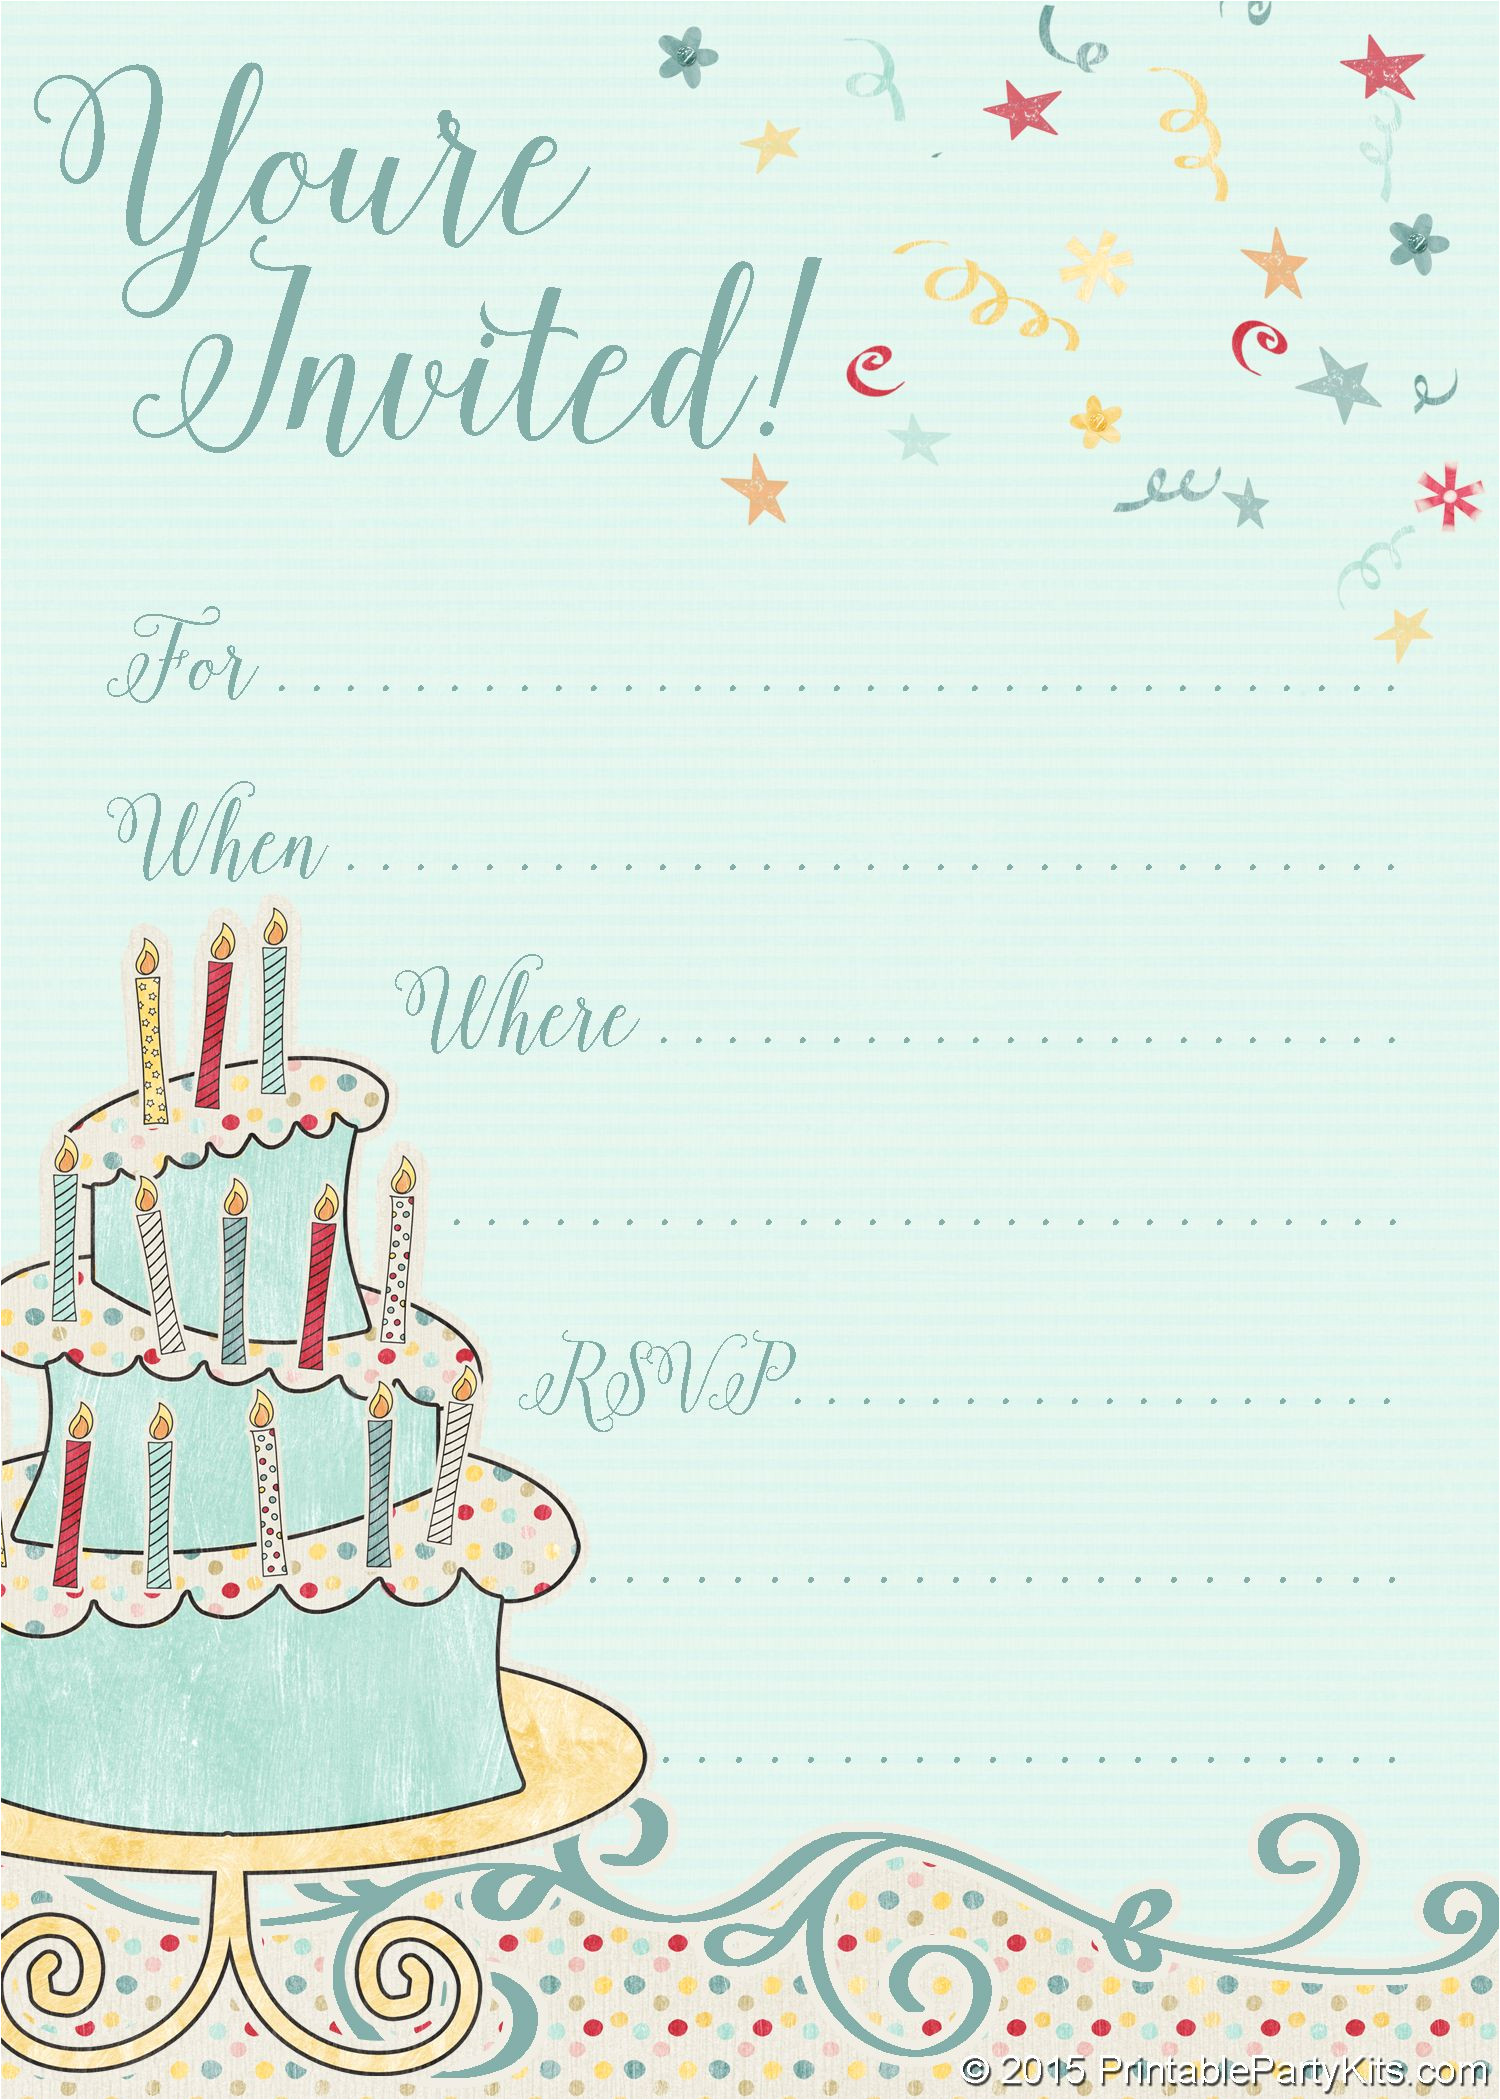 Invitation Card for 18th Birthday Background Free Printable Whimsical Birthday Party Invitation T with